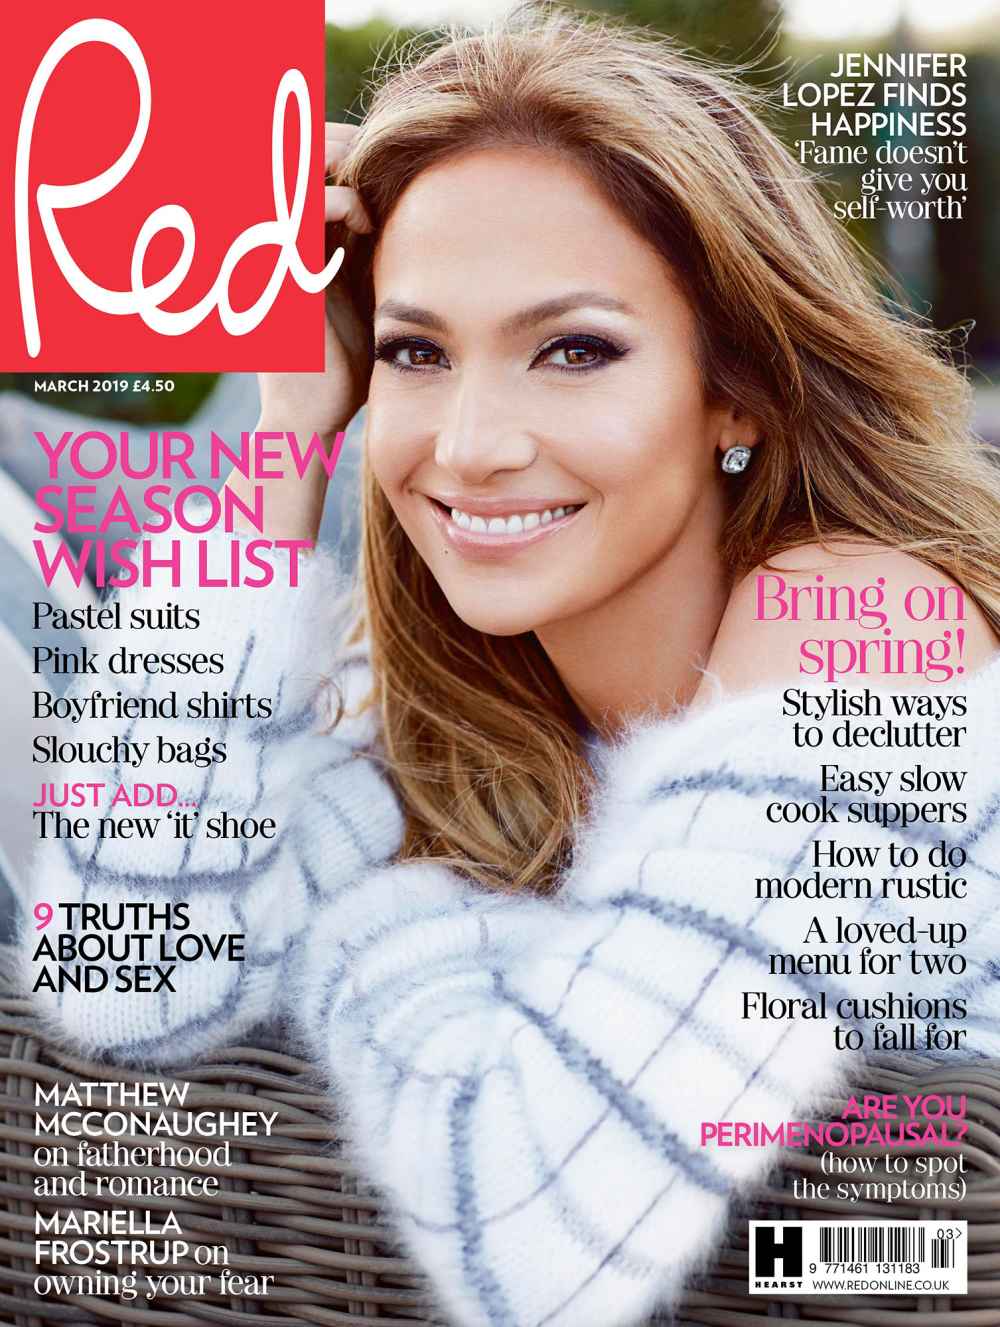 Jennifer Lopez on the cover of 'Red Magazine'